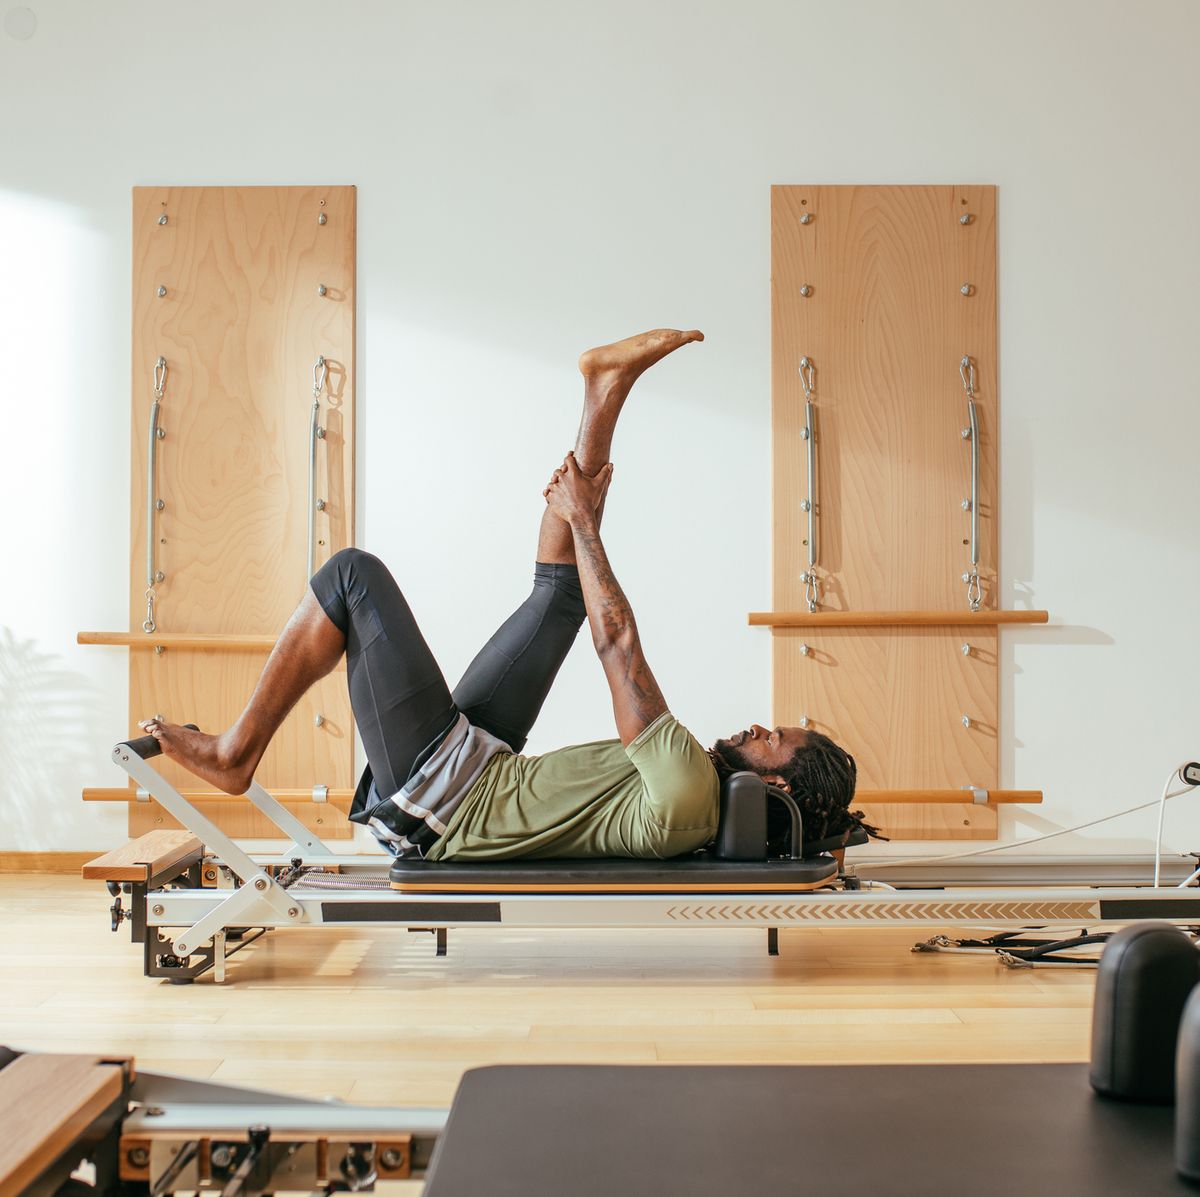 Pilates stretching - is Pilates good for stretching? The benefits explained